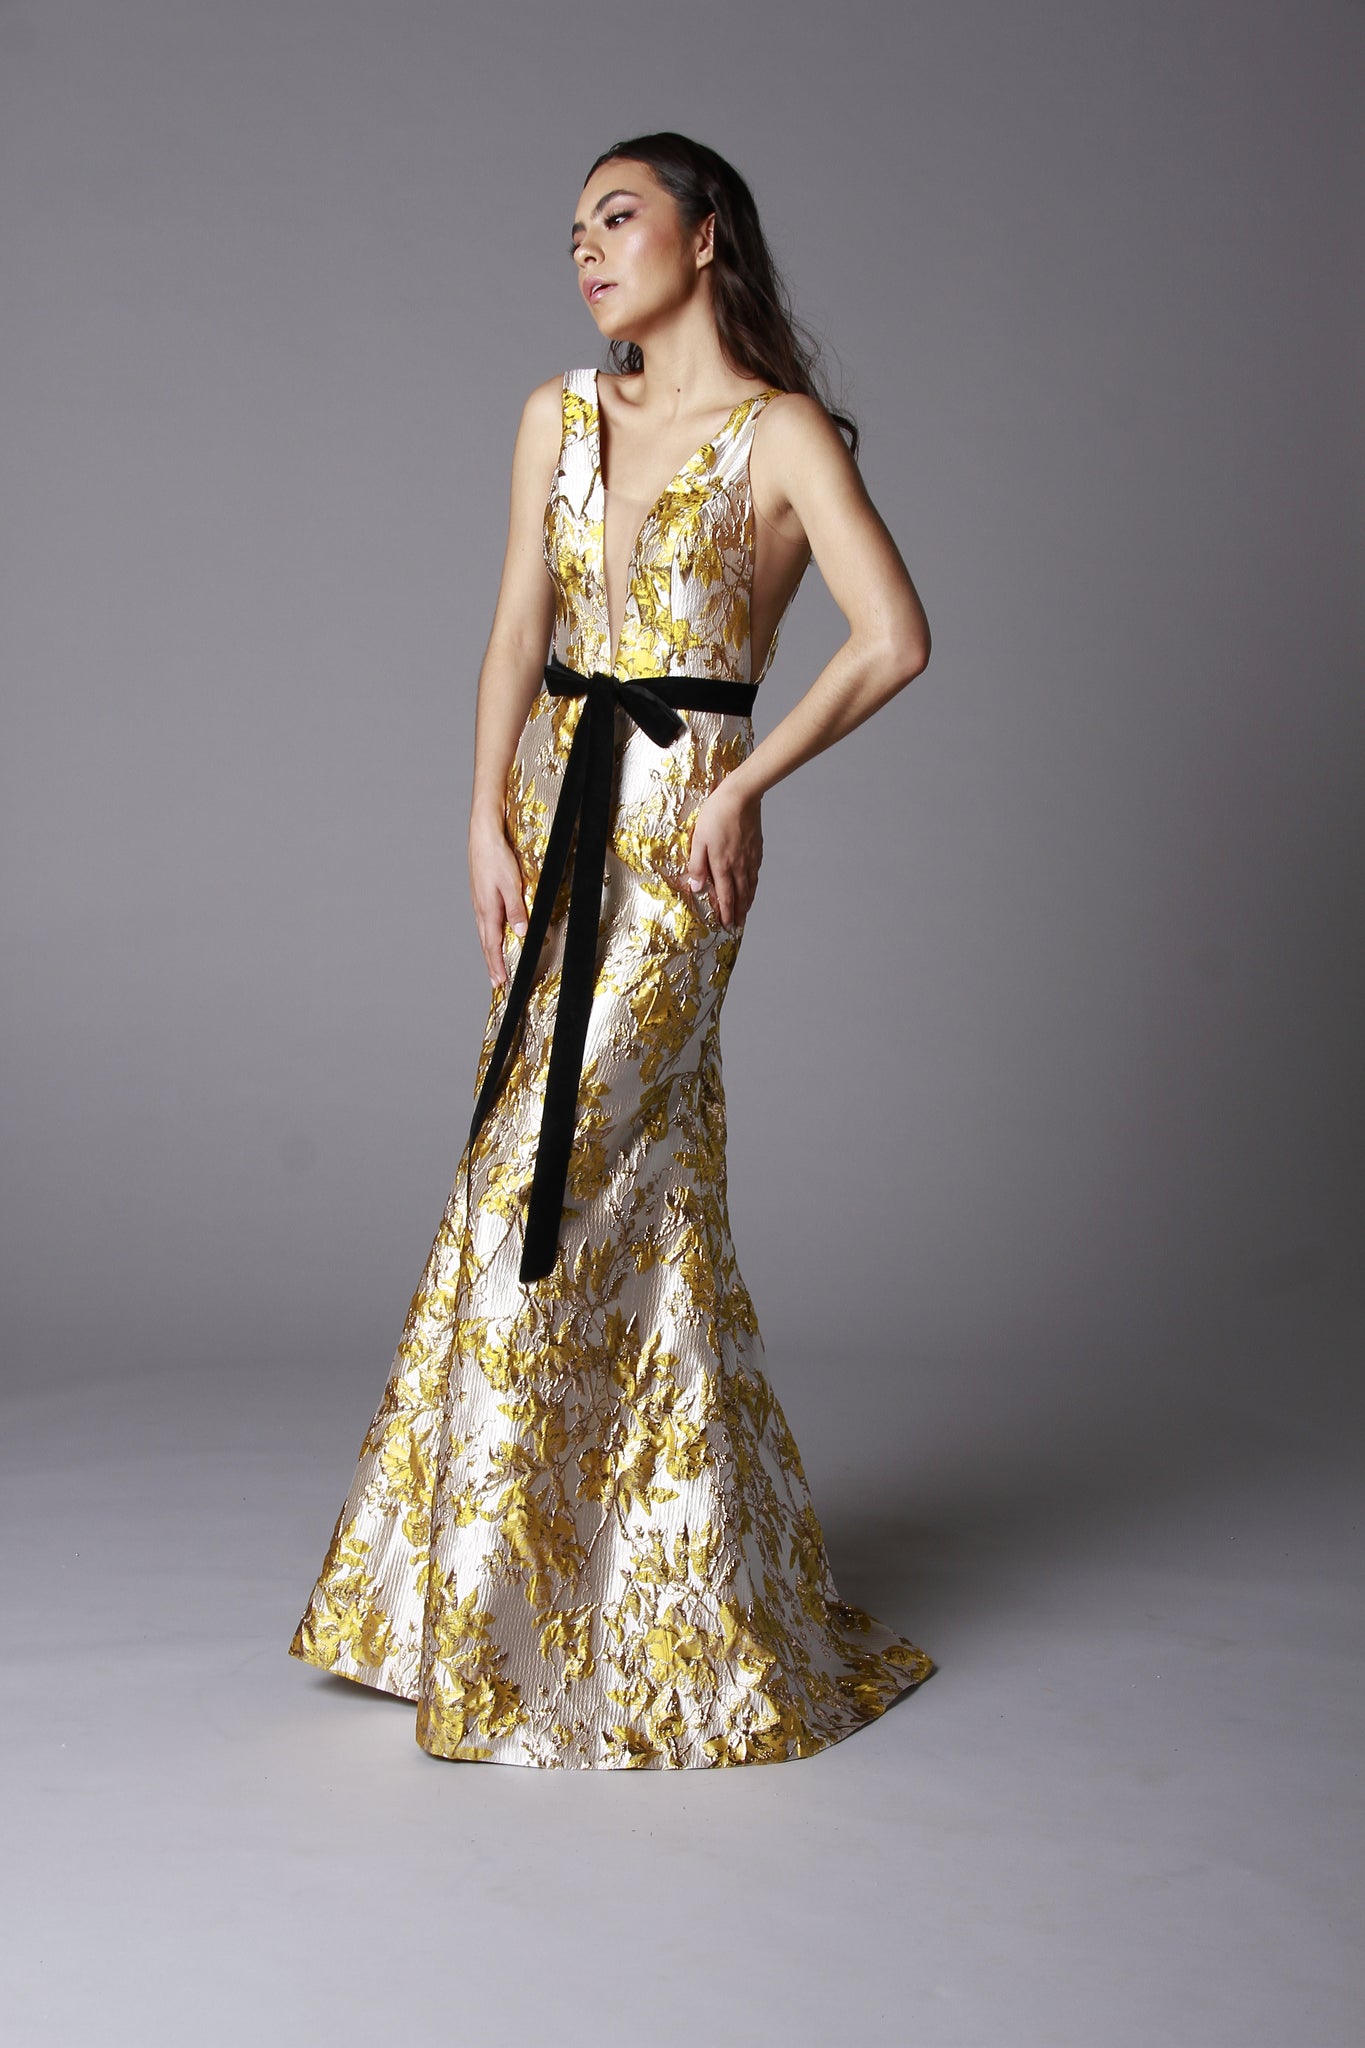 GOLD BROCADE GOWN